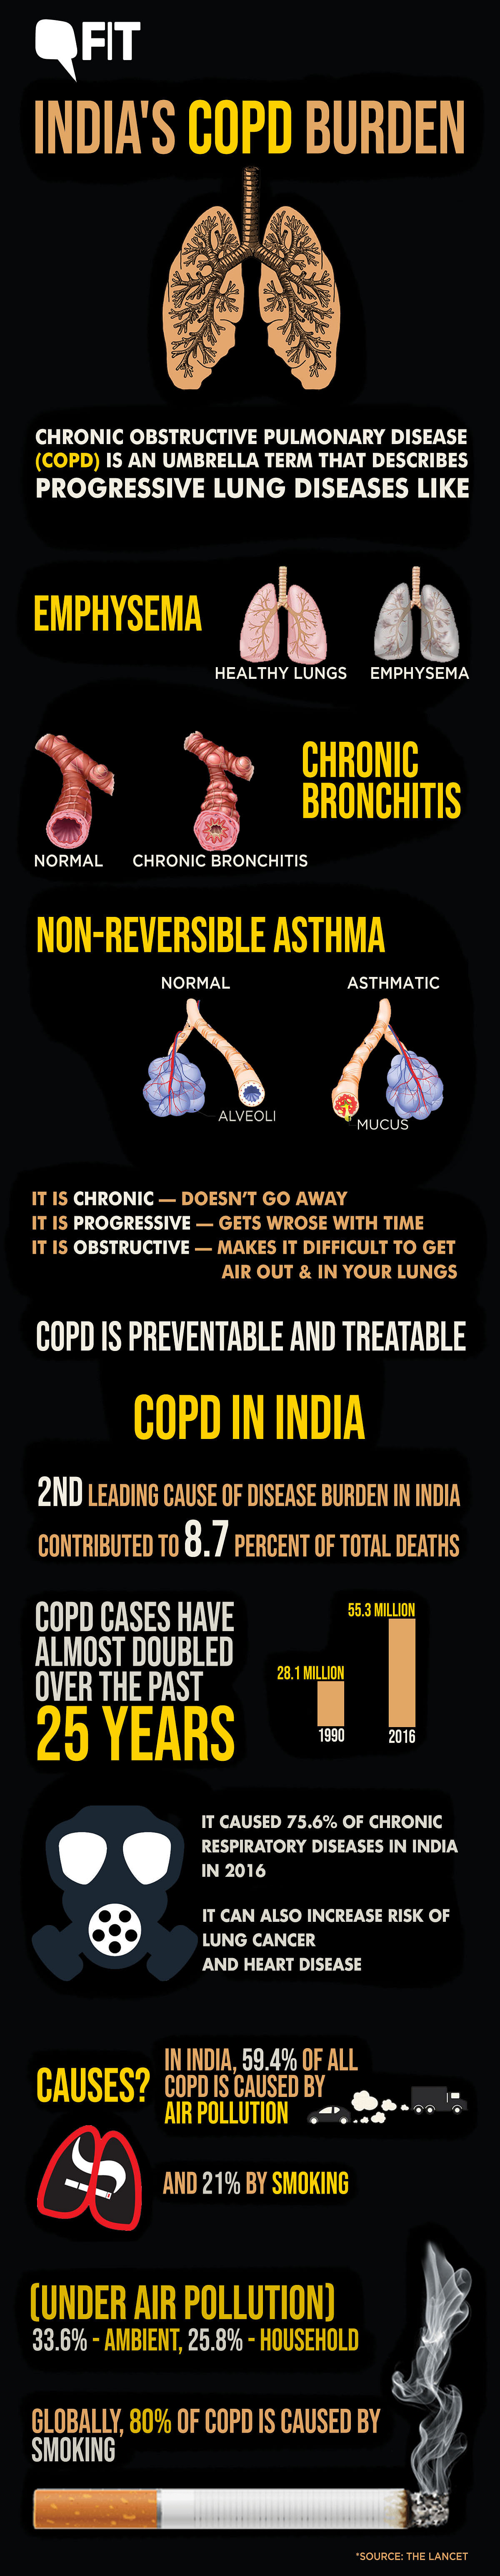 Indians  are gasping for air. Over 5.5 crore Indians are battling chronic lung diseases.  